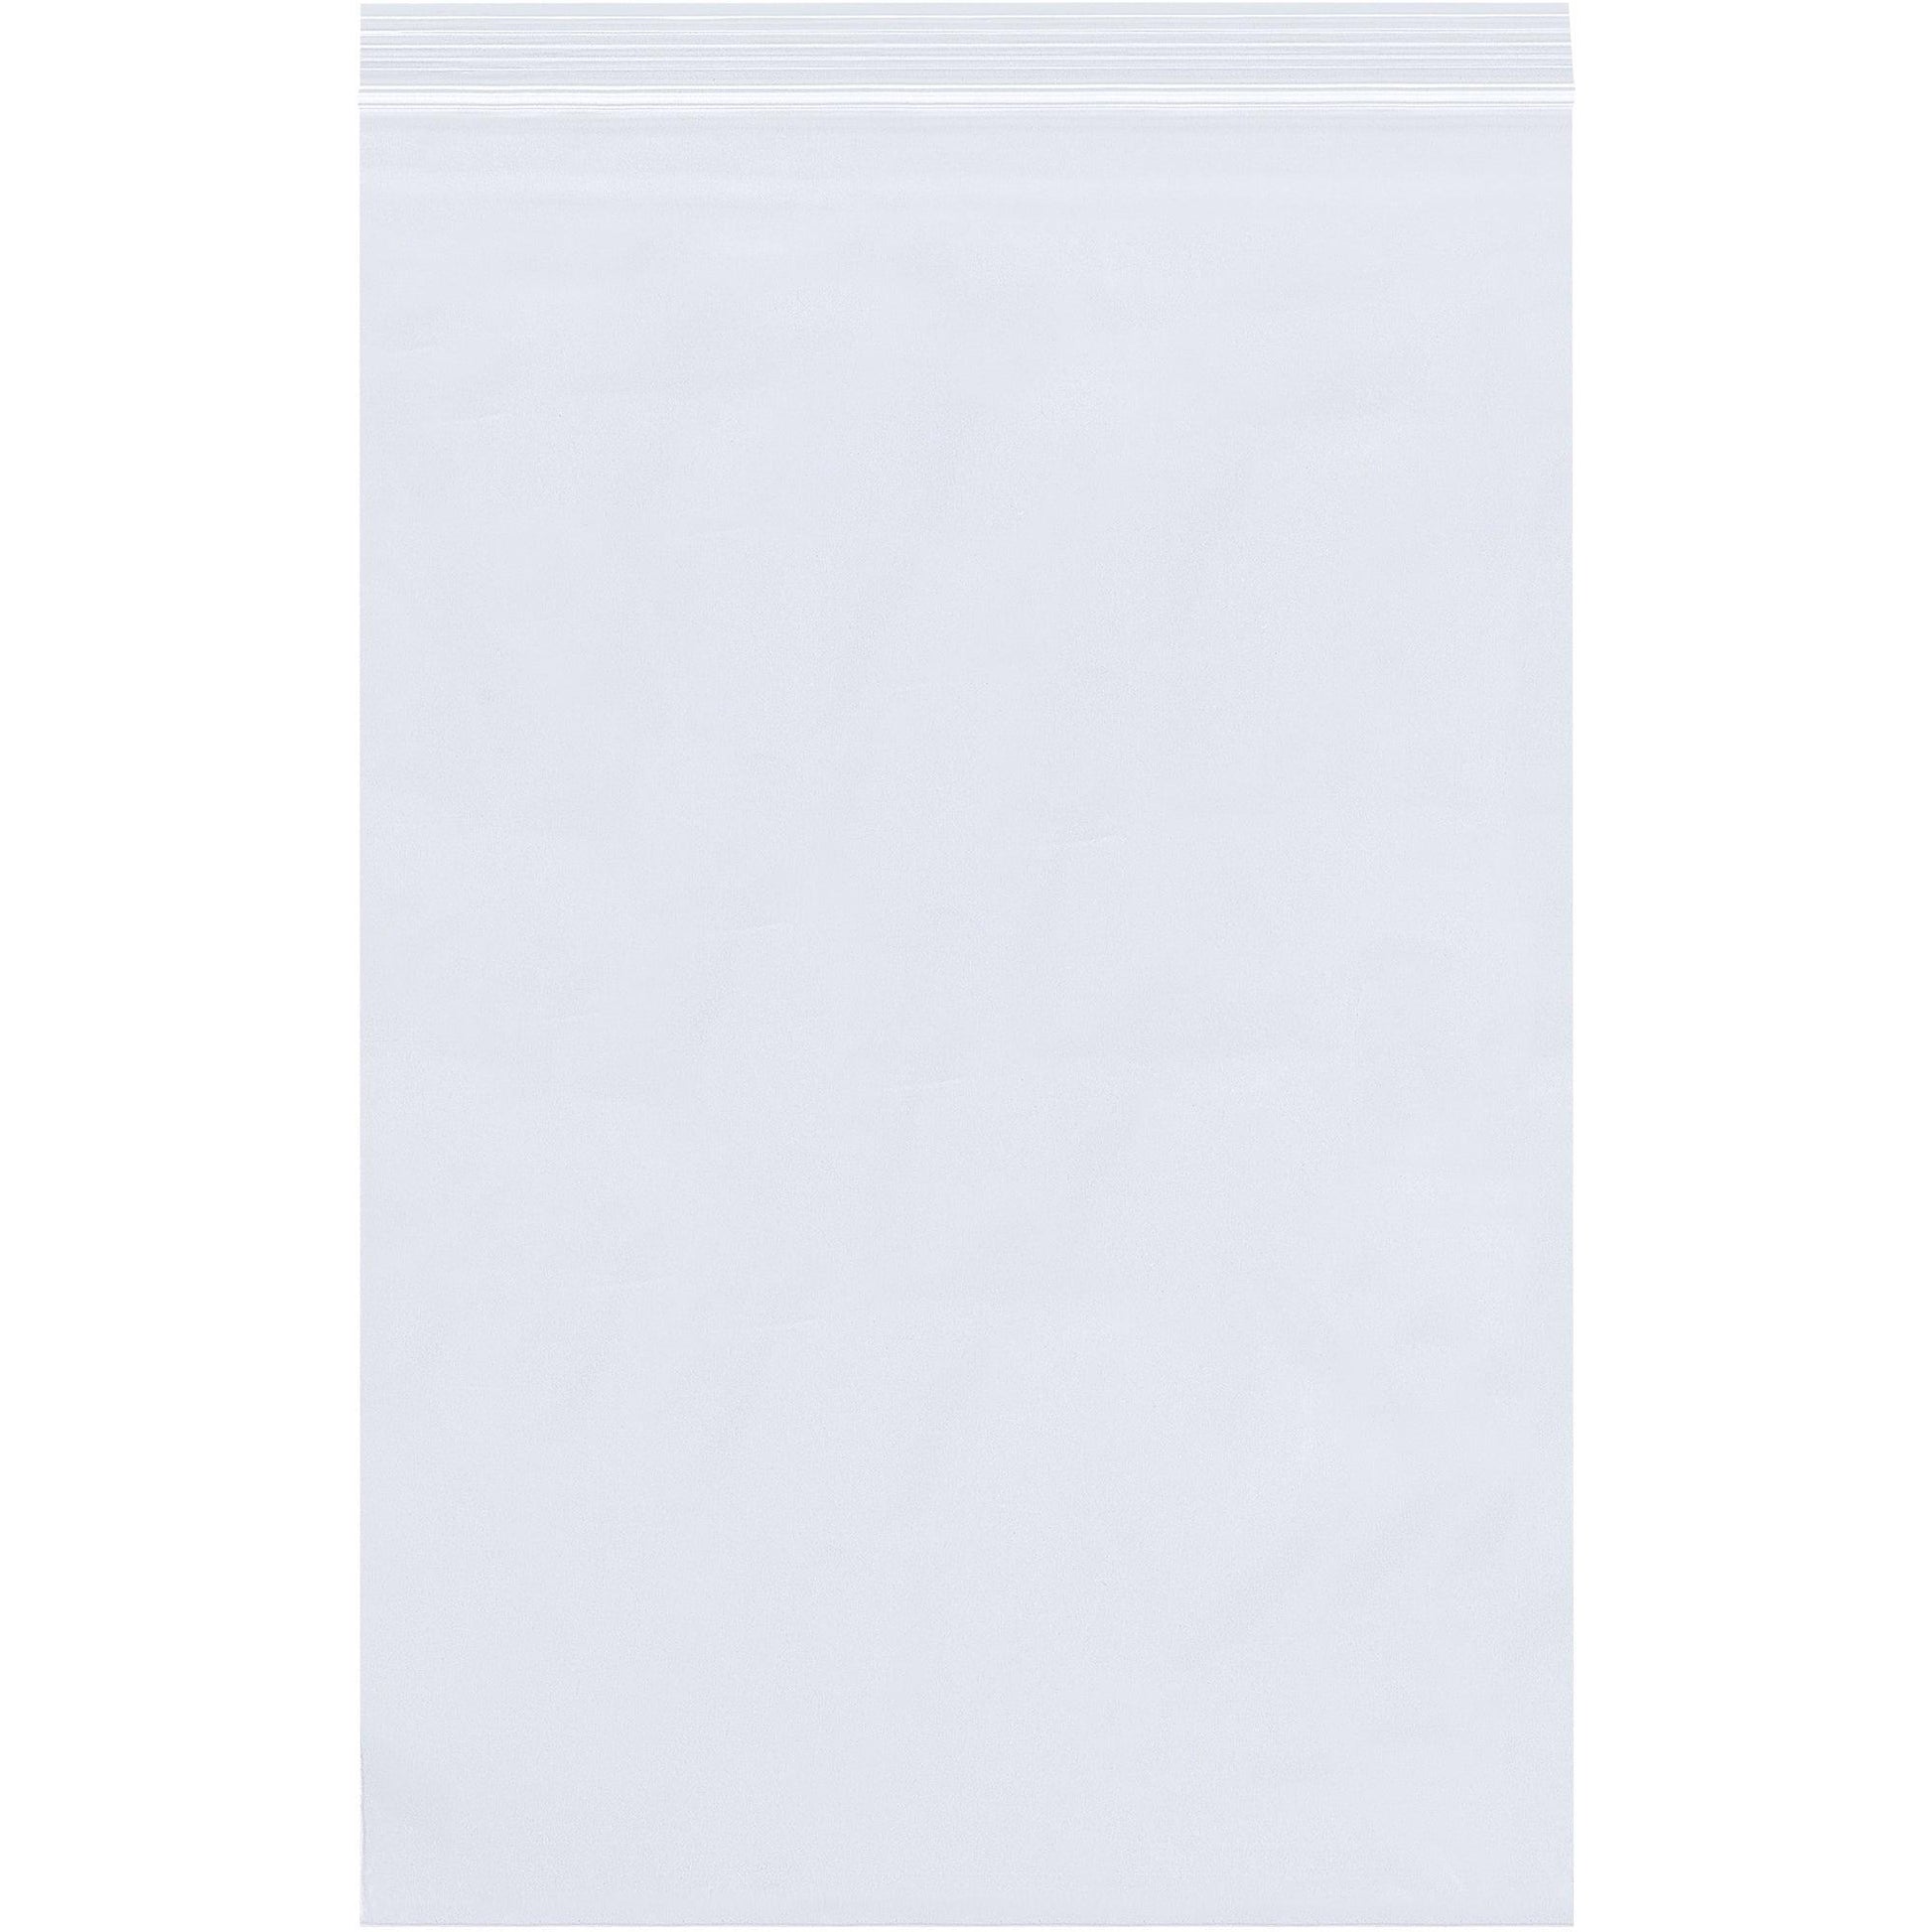 4 x 4" - 2 Mil Reclosable Poly Bags - PB3560